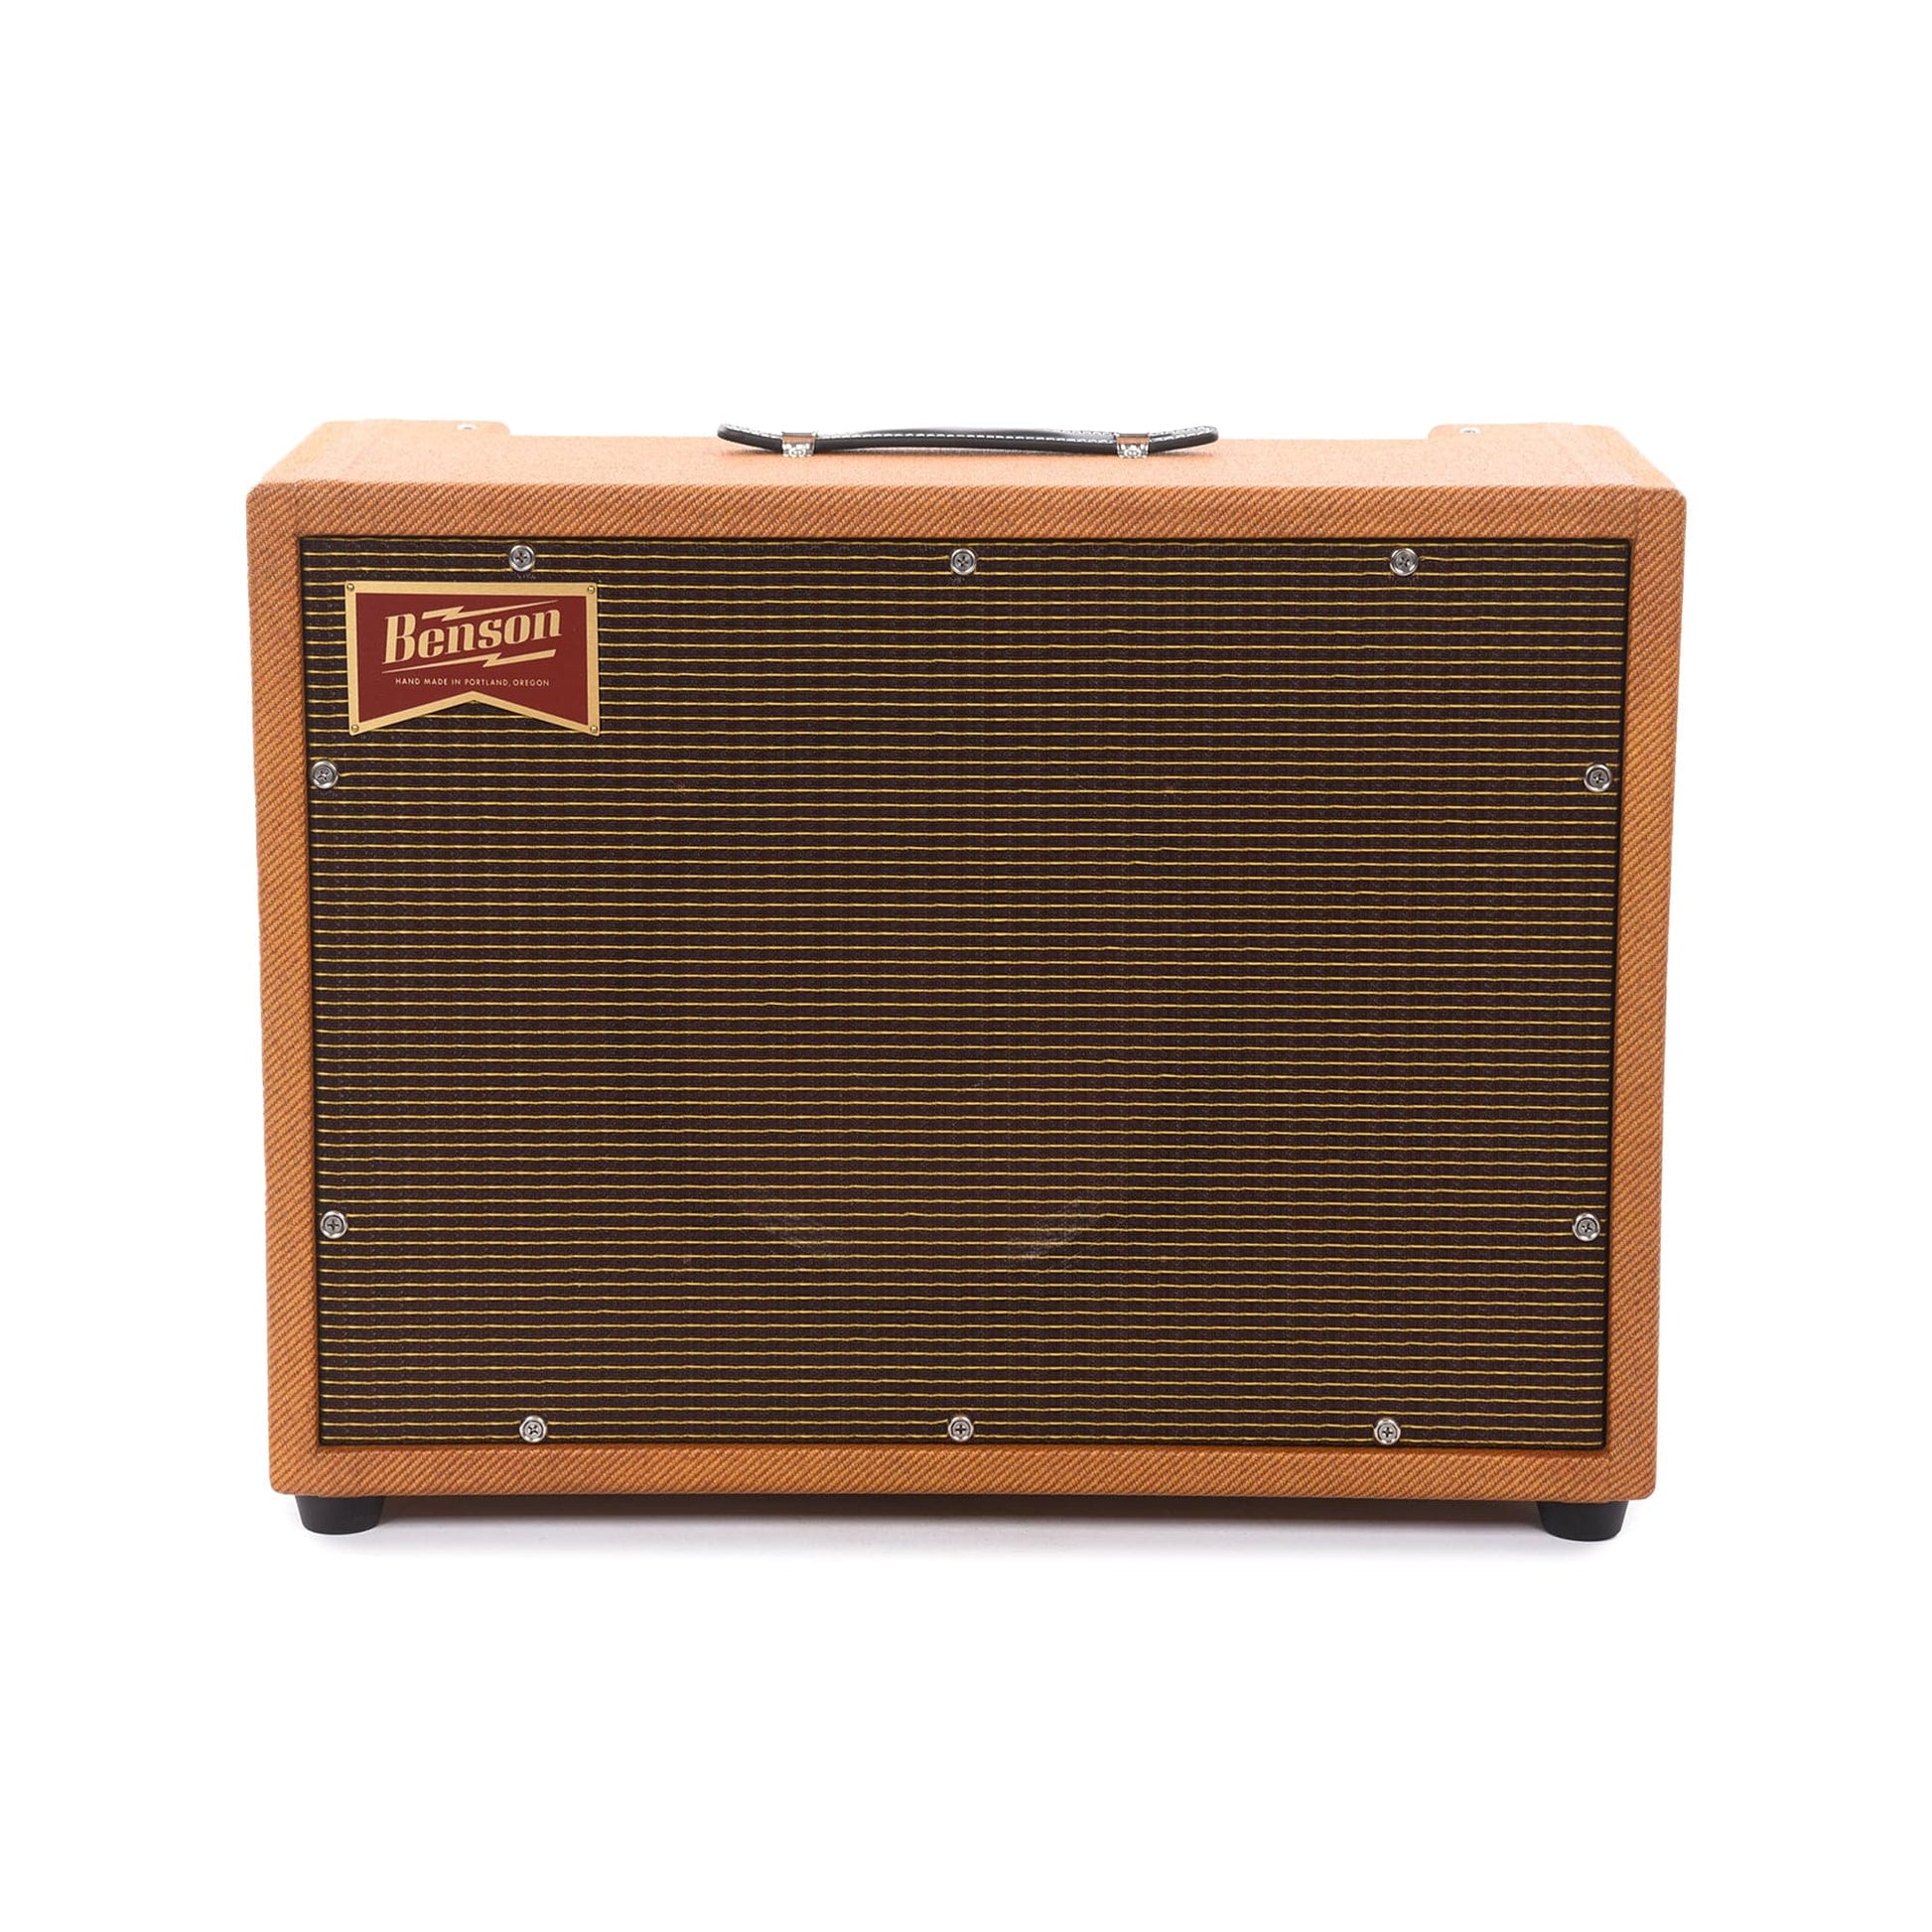 Benson Monarch Reverb 1x12 Combo Tweed w/Oxbood Grill Amps / Guitar Combos